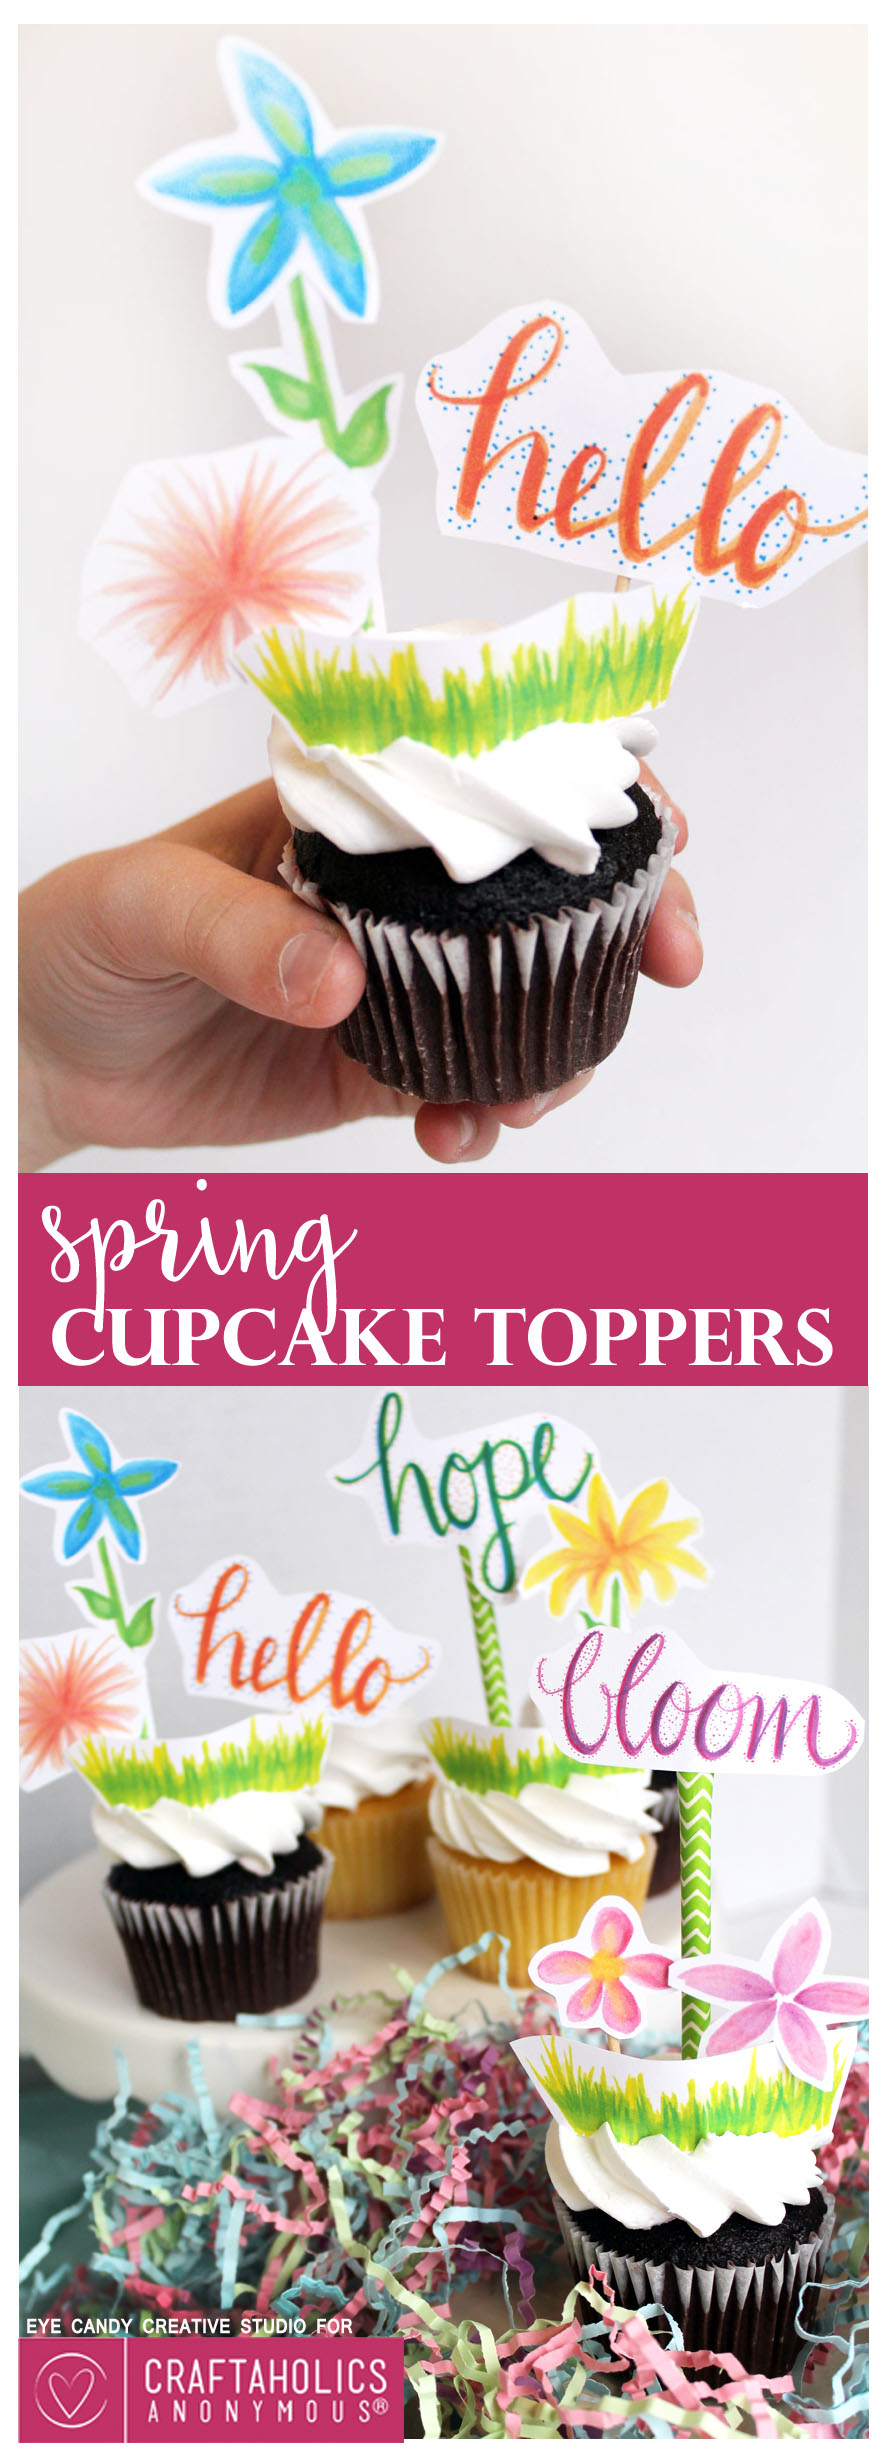 Free Printable Spring Cupcake Toppers :: So colorful and cute! Perfect for a garden party.